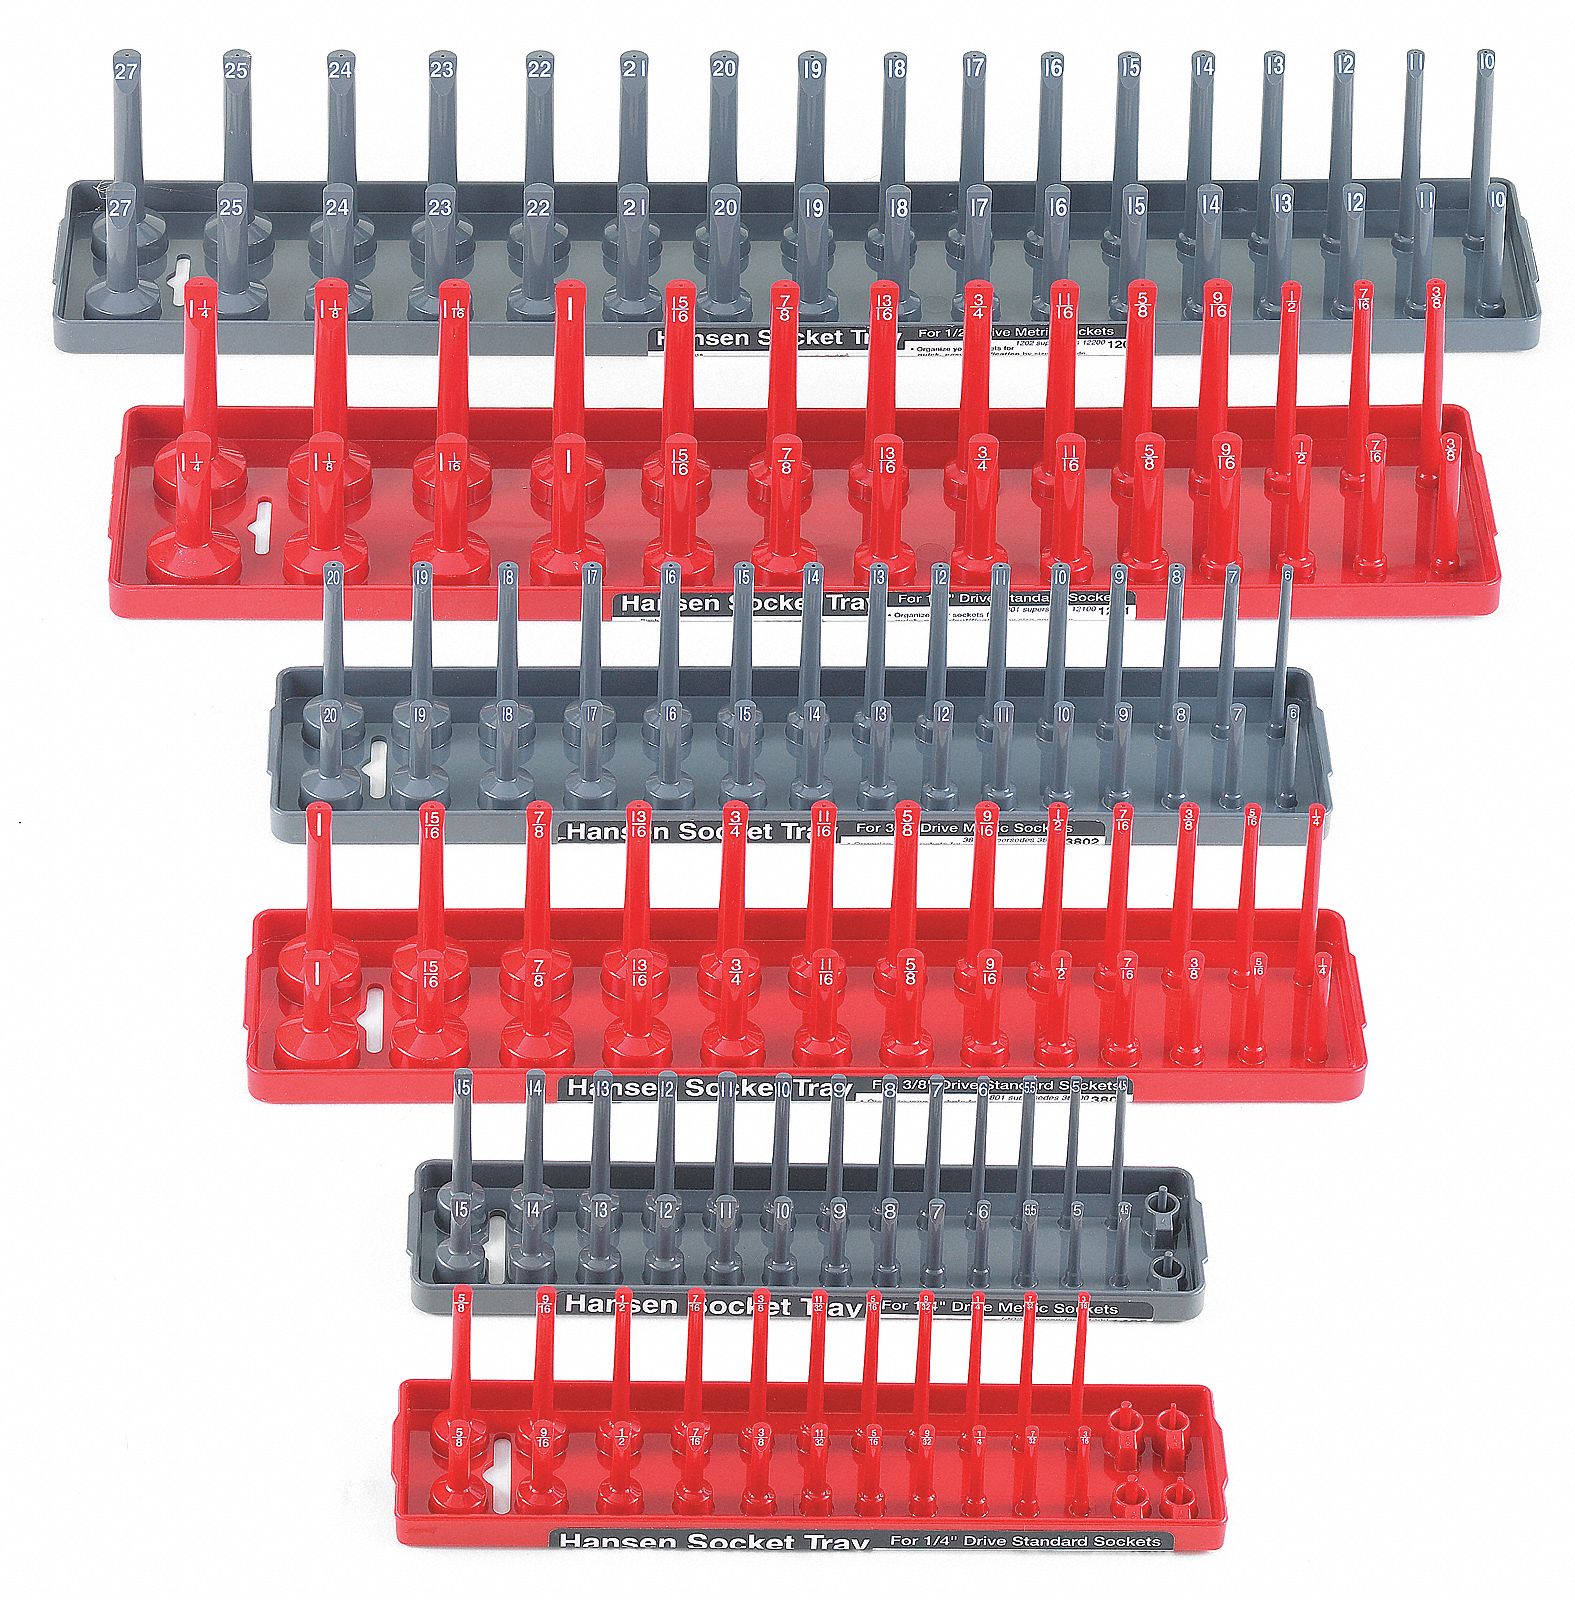 Socket Tray: Gray/Red, 8 in Overall Wd, 4 1/2 in Overall Ht, 118_28_30_34 Posts/Slots, 6 PK